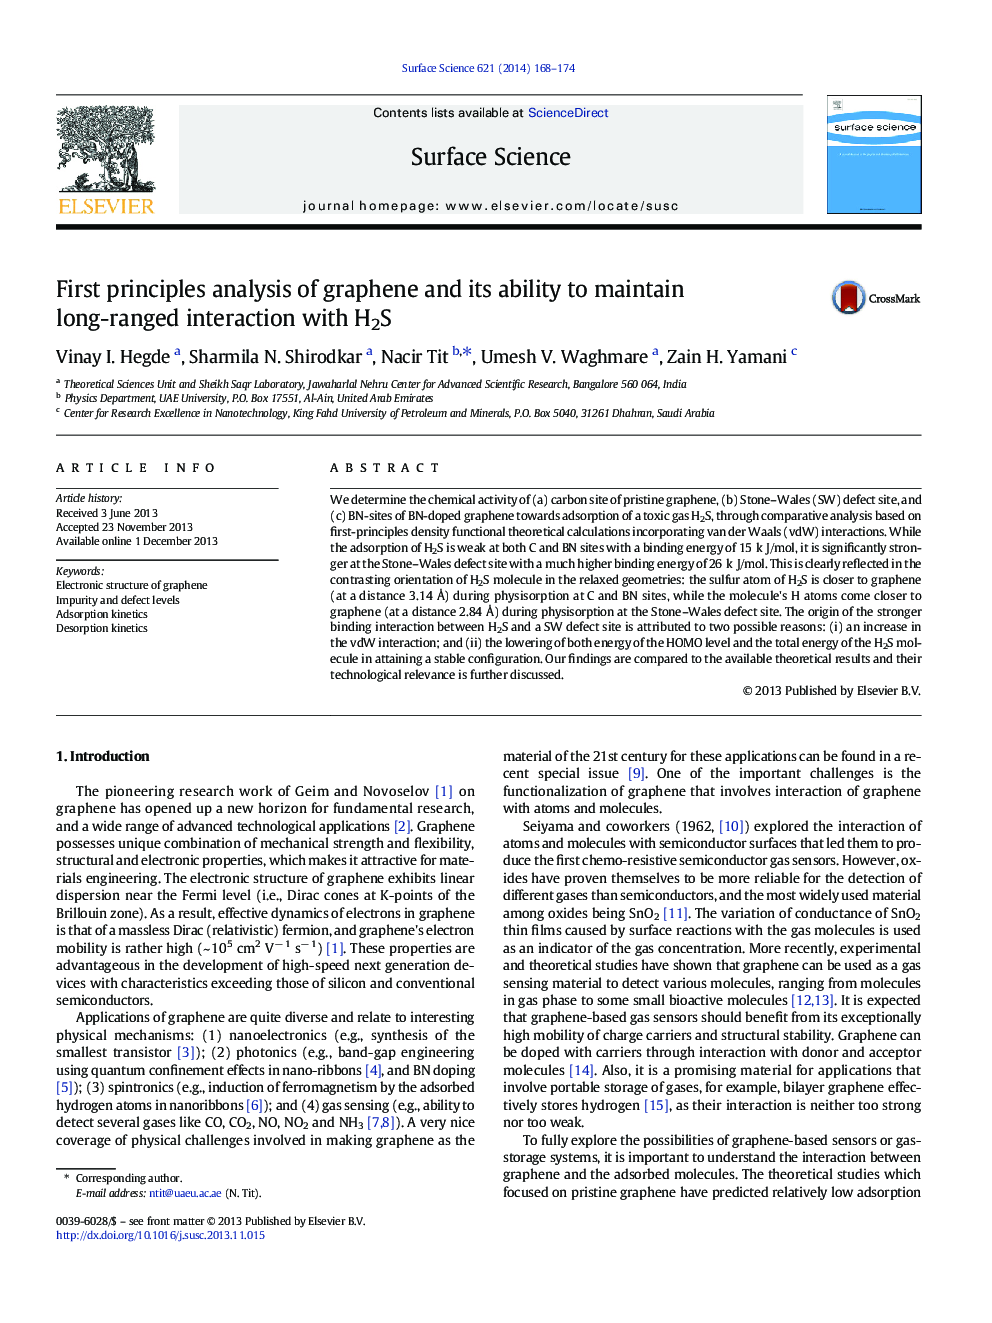 First principles analysis of graphene and its ability to maintain long-ranged interaction with H2S